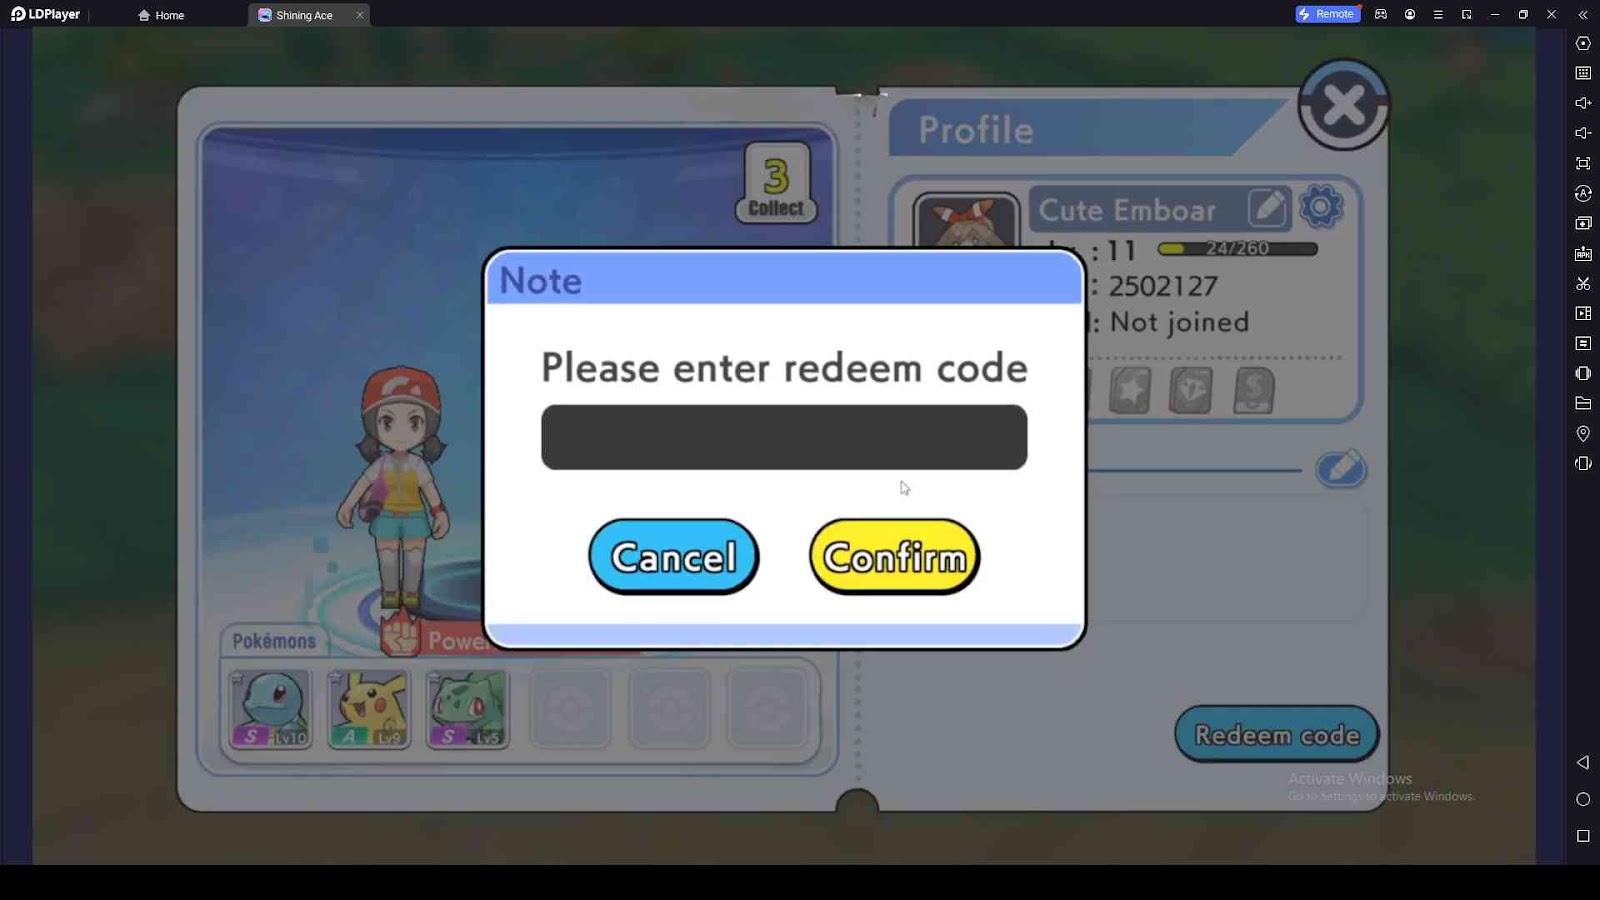 Redeeming Process for Shining Ace Redeem Codes